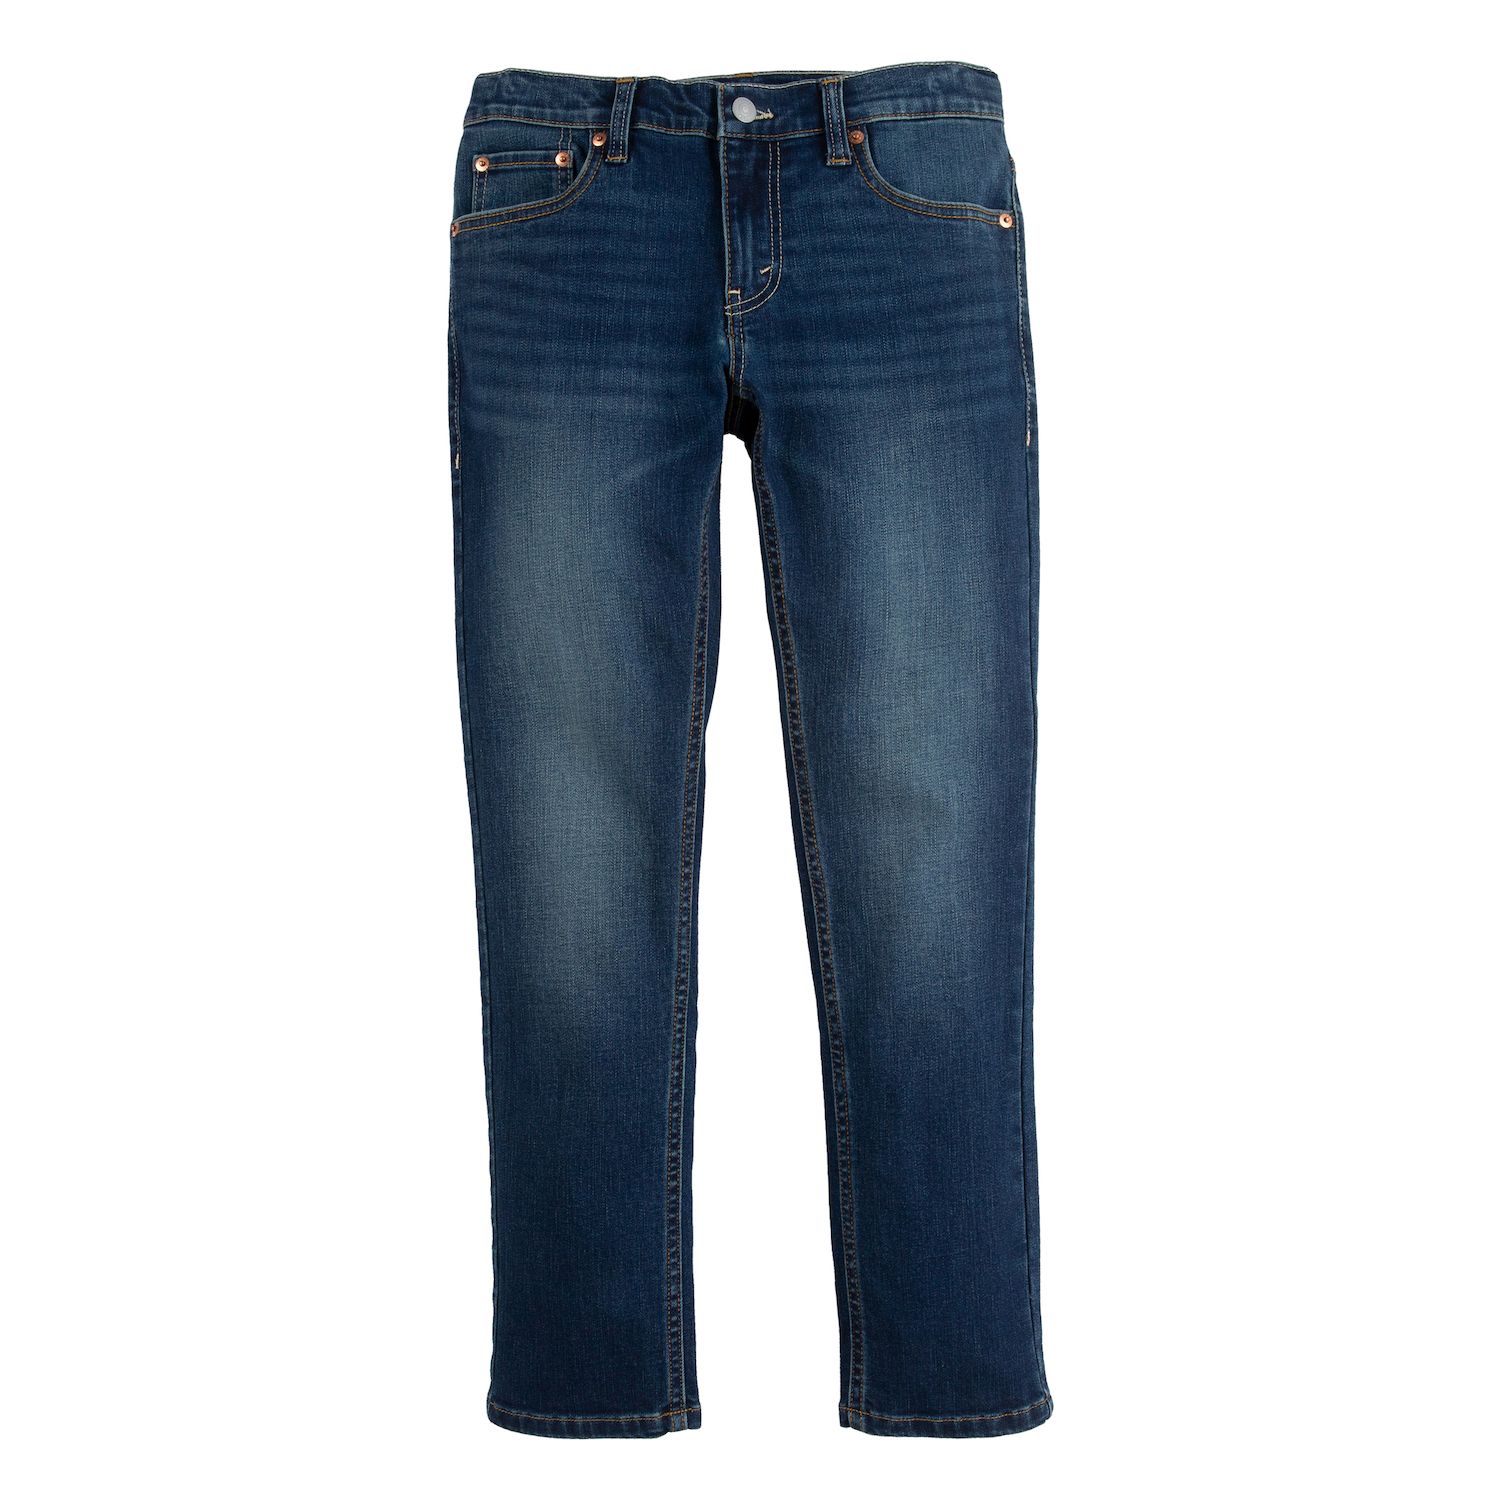 512™ Slim-Fit Tapered Jeans